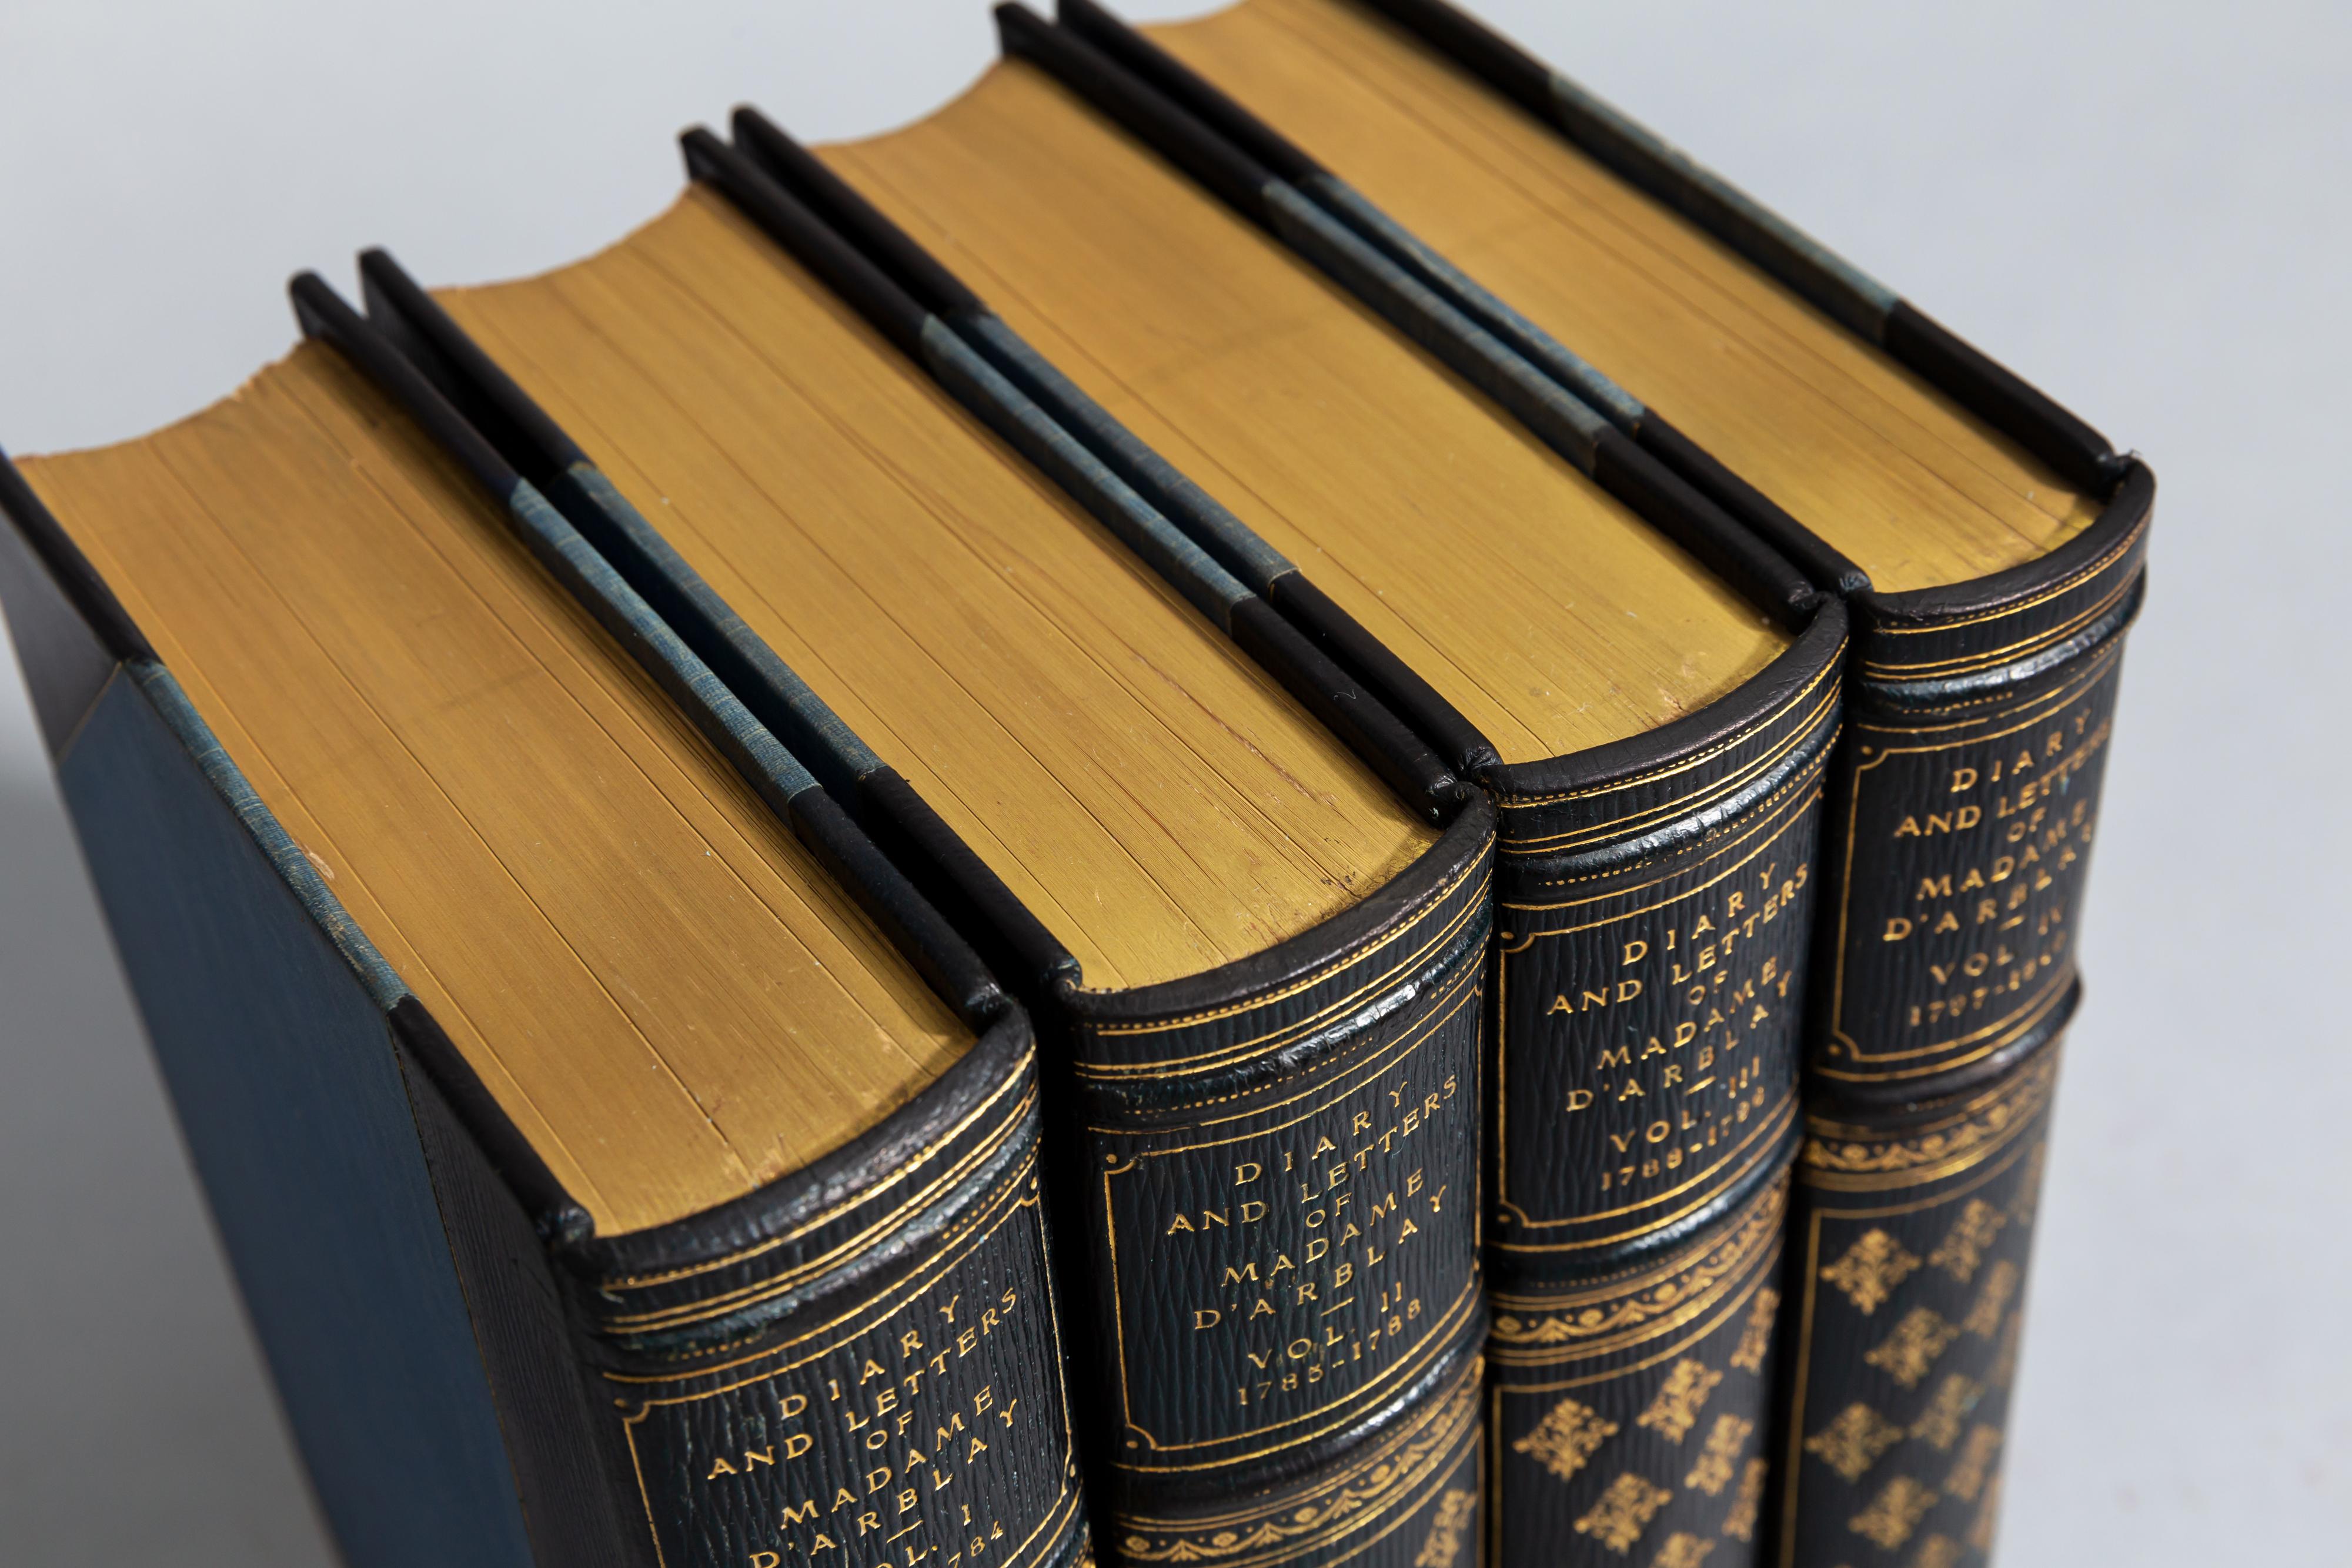 4 volumes. 

Edited by her niece Charlotte Barrett. 

Bound in 3/4 blue Morocco by Birdsall, cloth boards, top edges gilt, ornate gilt on spines, raised bands, illustrated with 14 full-page engraved Portraits. 

Published: London: Chatto &